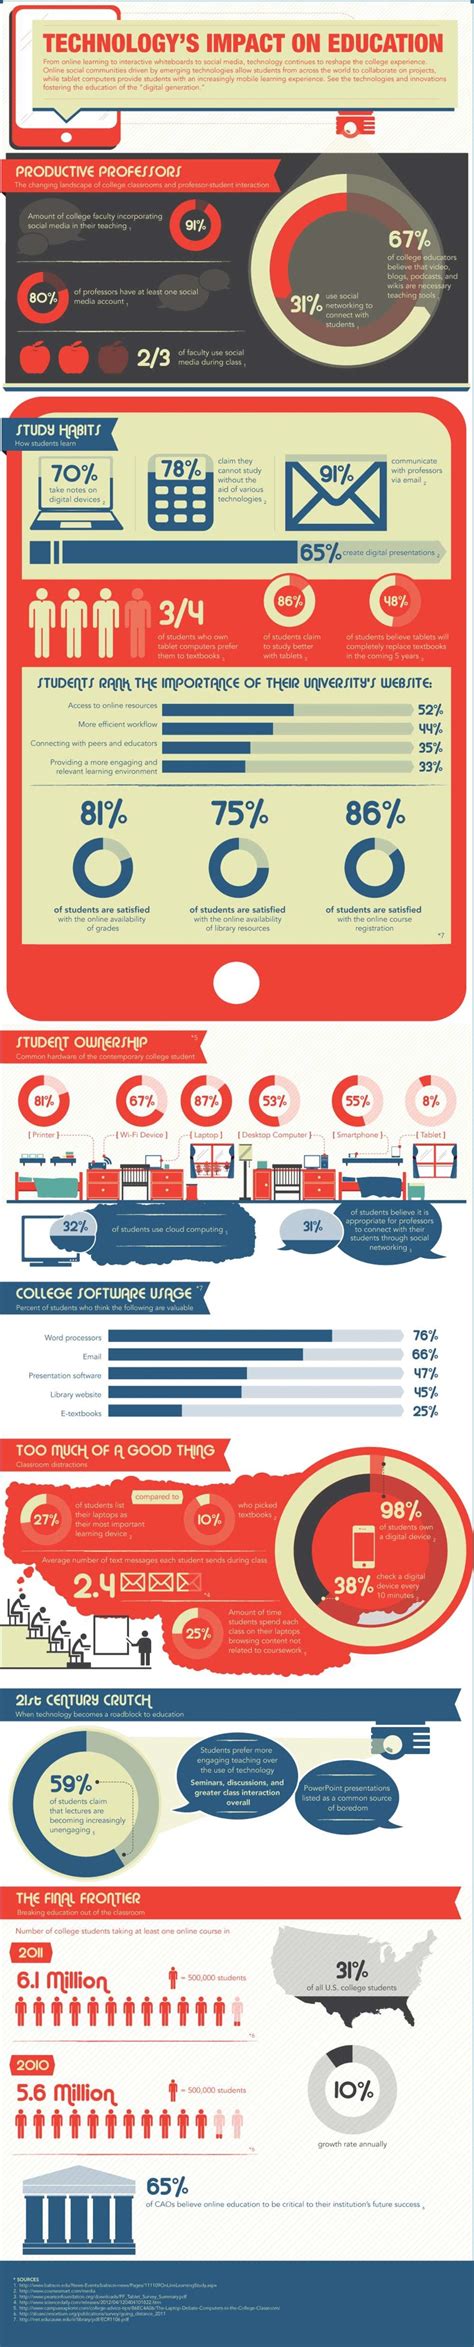 Technologys Pervasive Impact On Higher Education Infographic